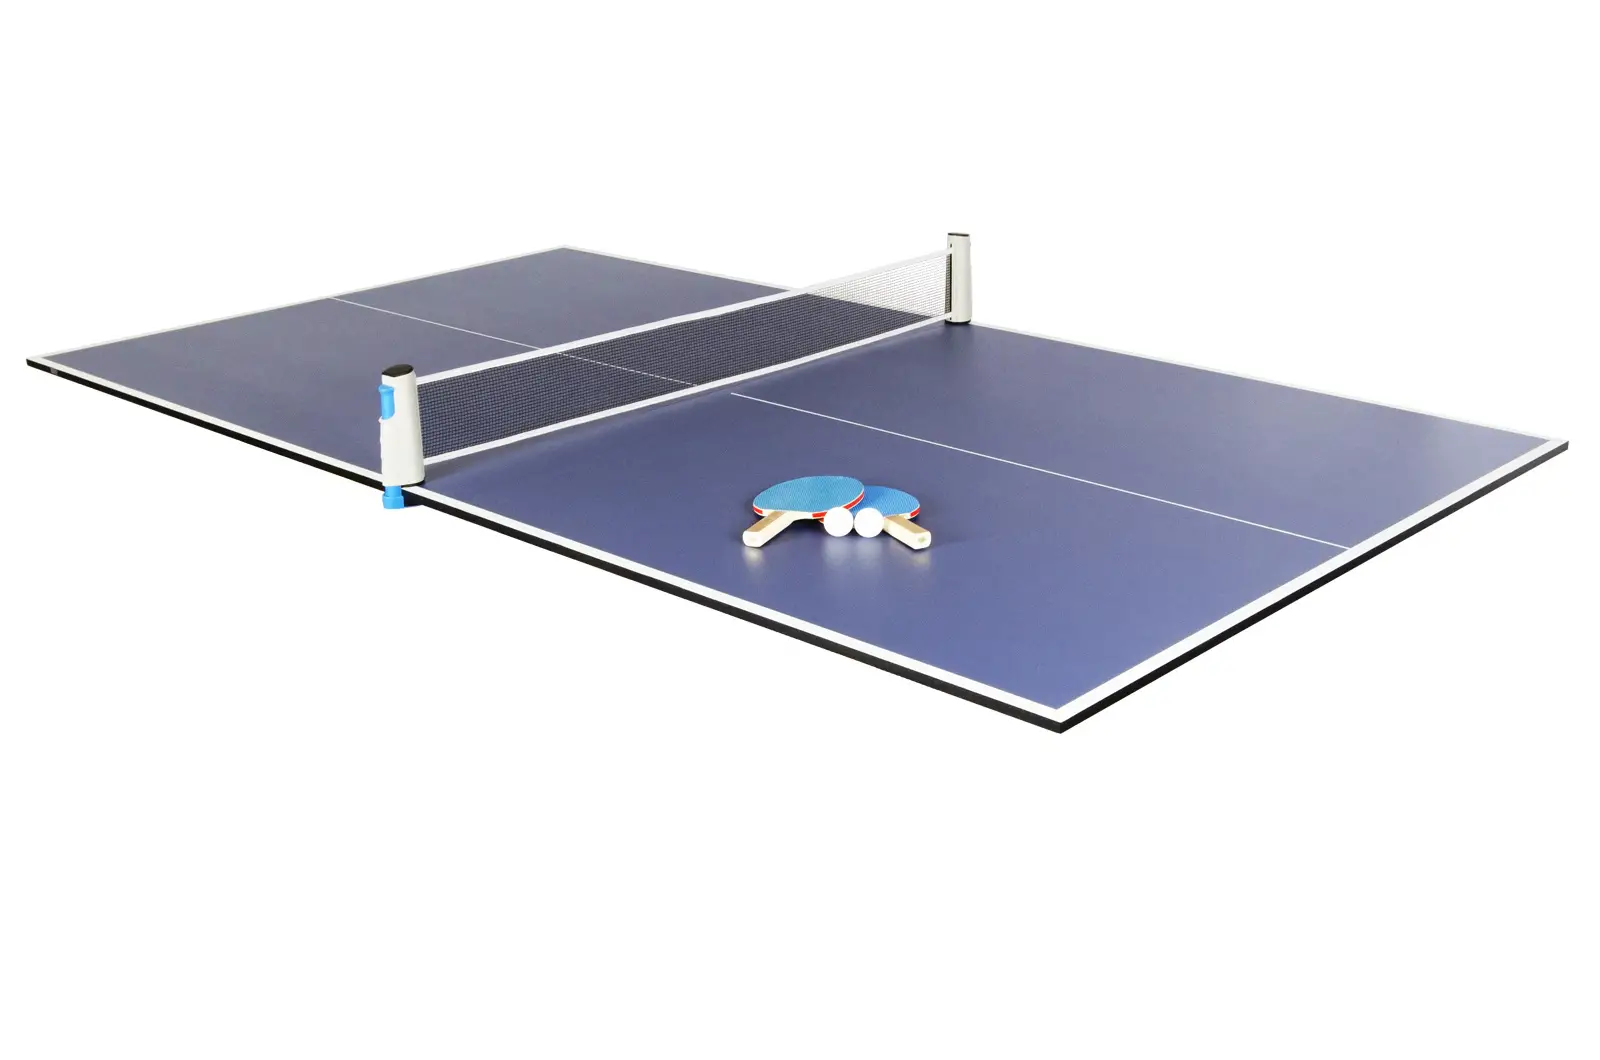 6 Best Table Tennis Conversion Tops For, Can You Put A Ping Pong Table Top On Pool